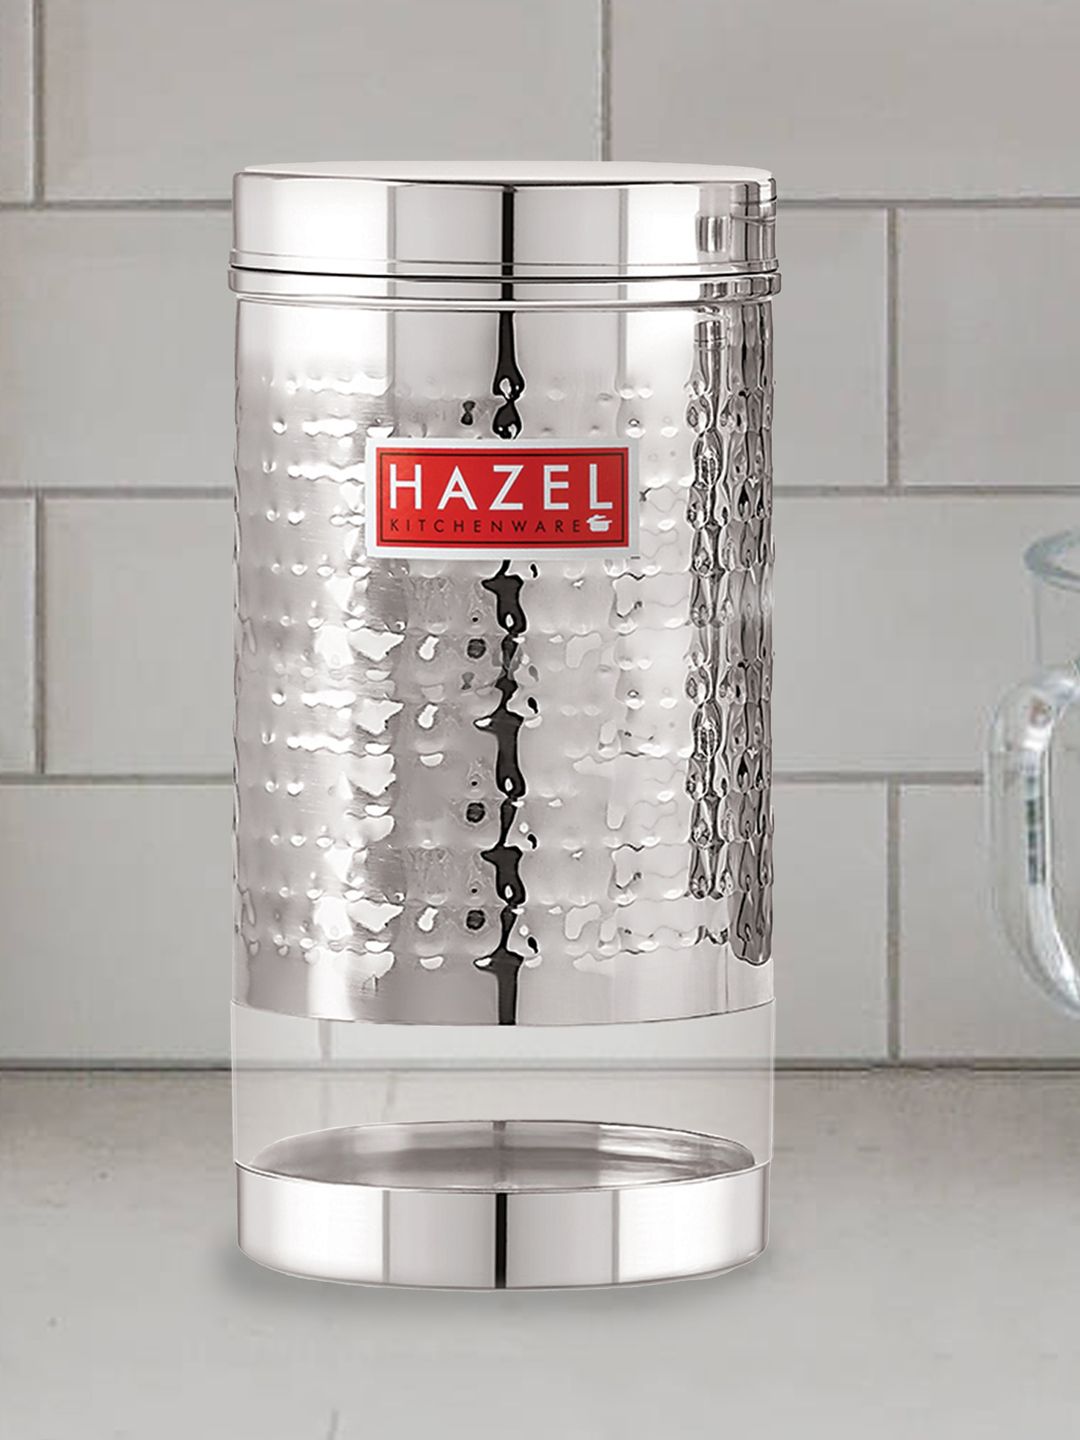 HAZEL Set Of 5 Silver-Toned Stainless Steel Hammered Finish See-Through Storage Jars1700ml Price in India